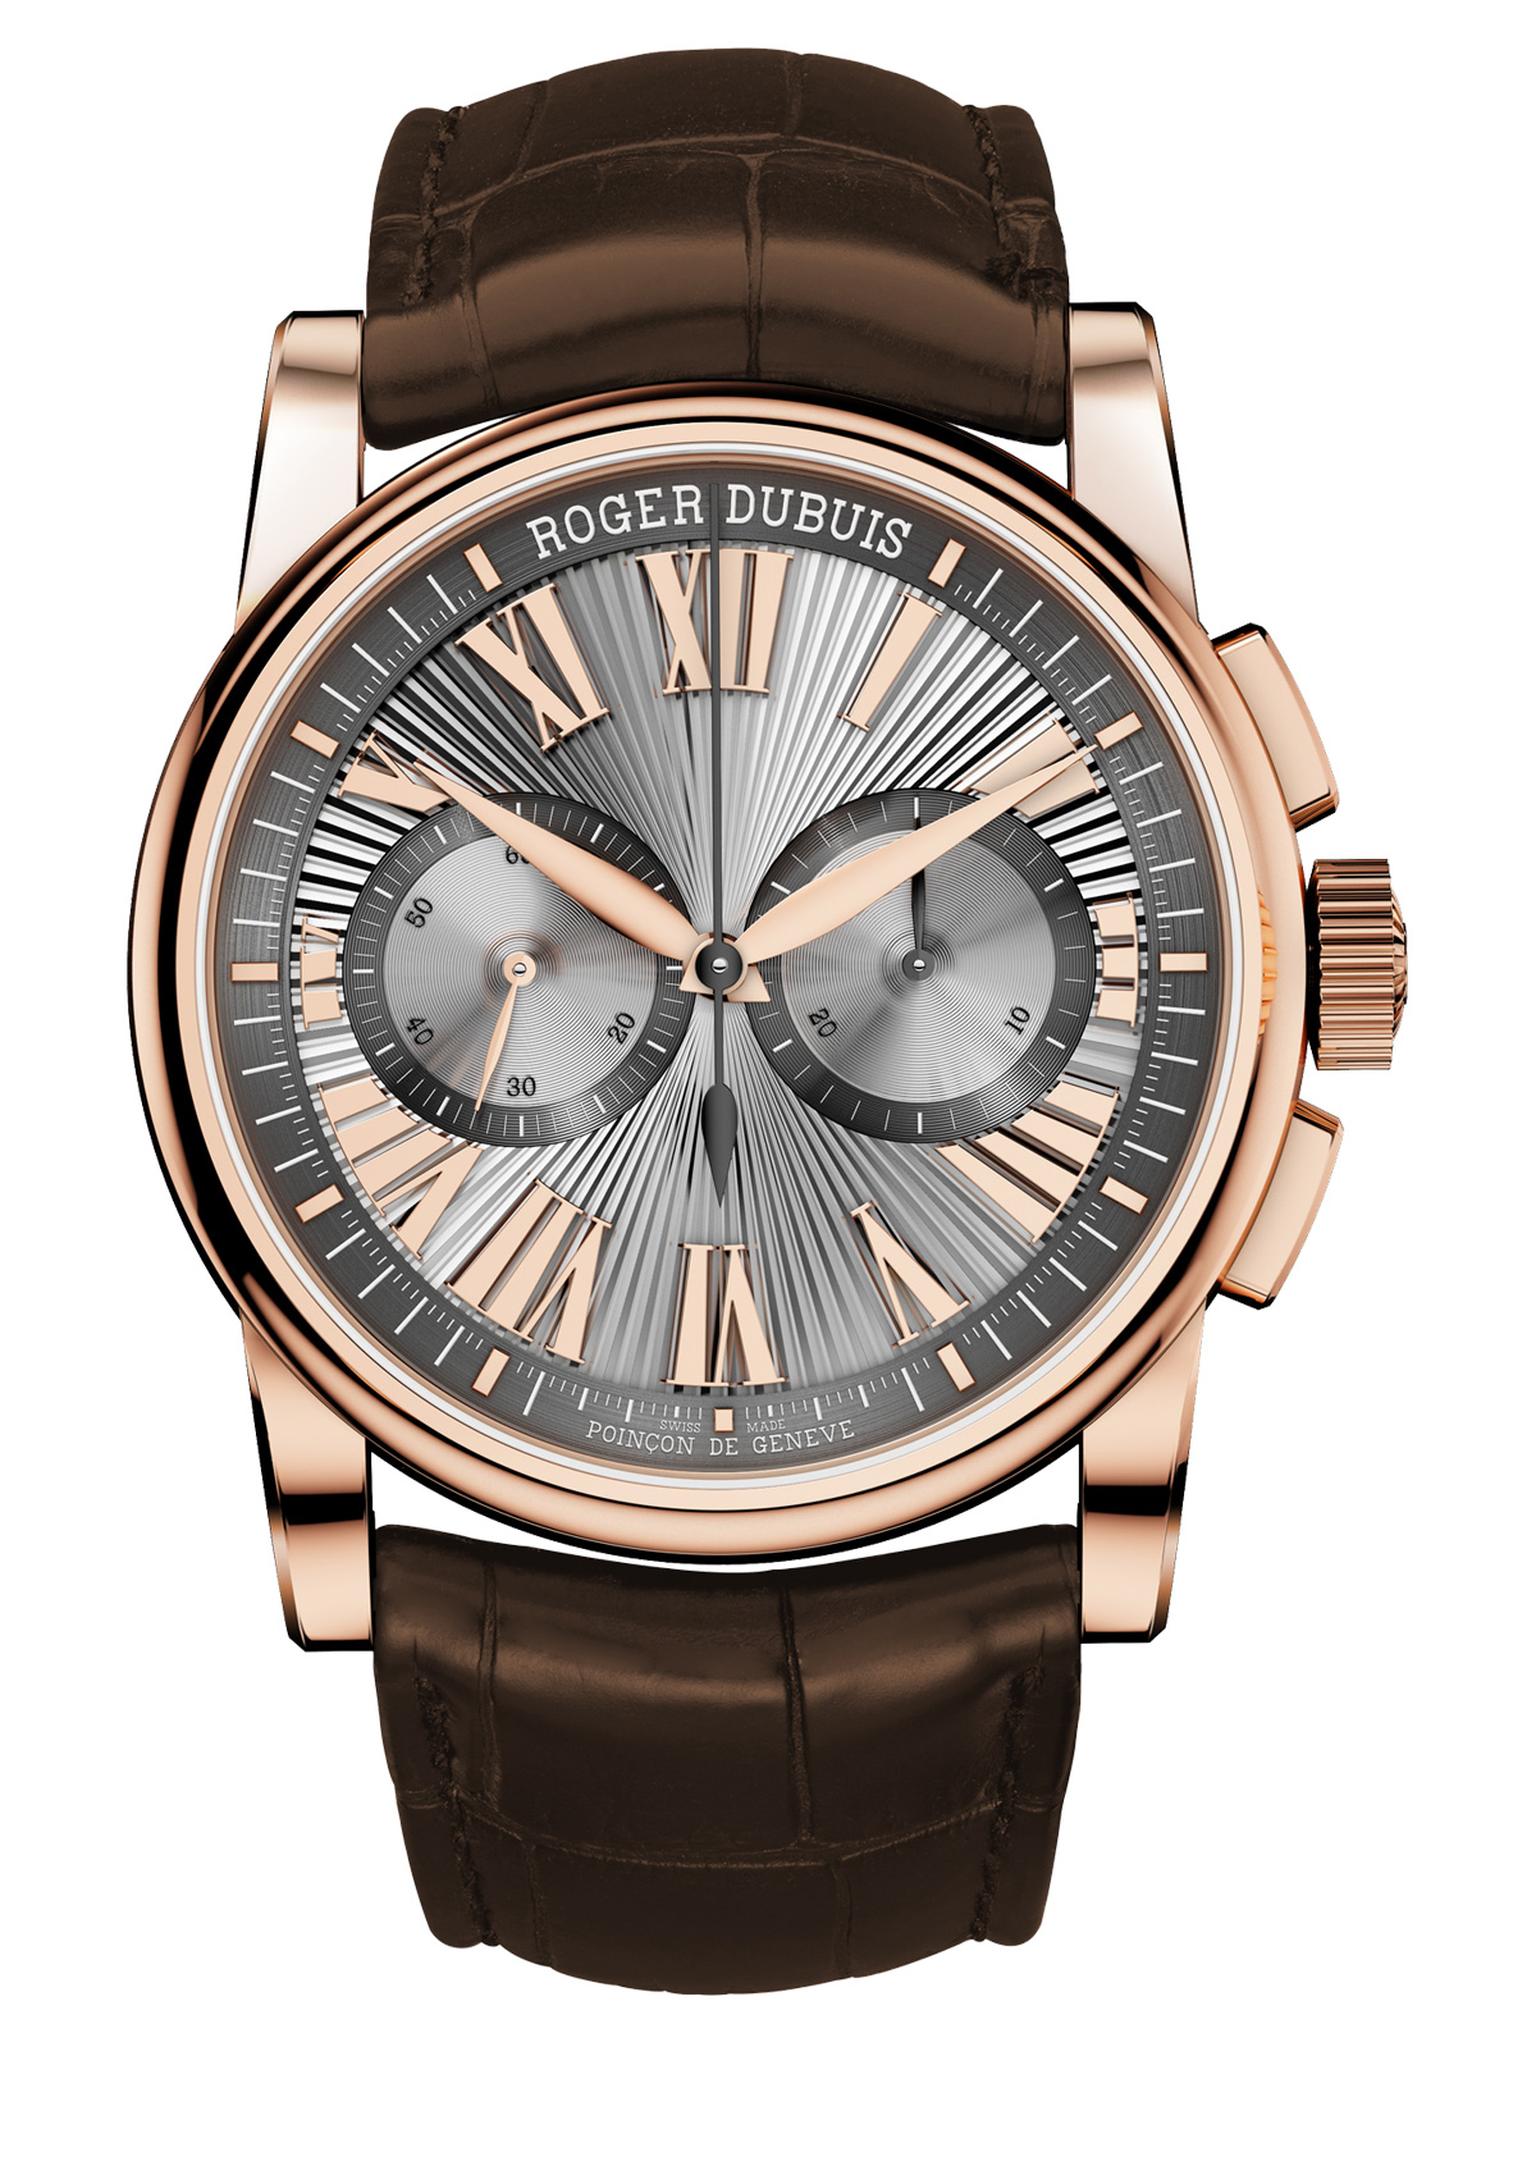 Roger Dubuis Hommage Chronograph in pink gold_20140408_Zoom